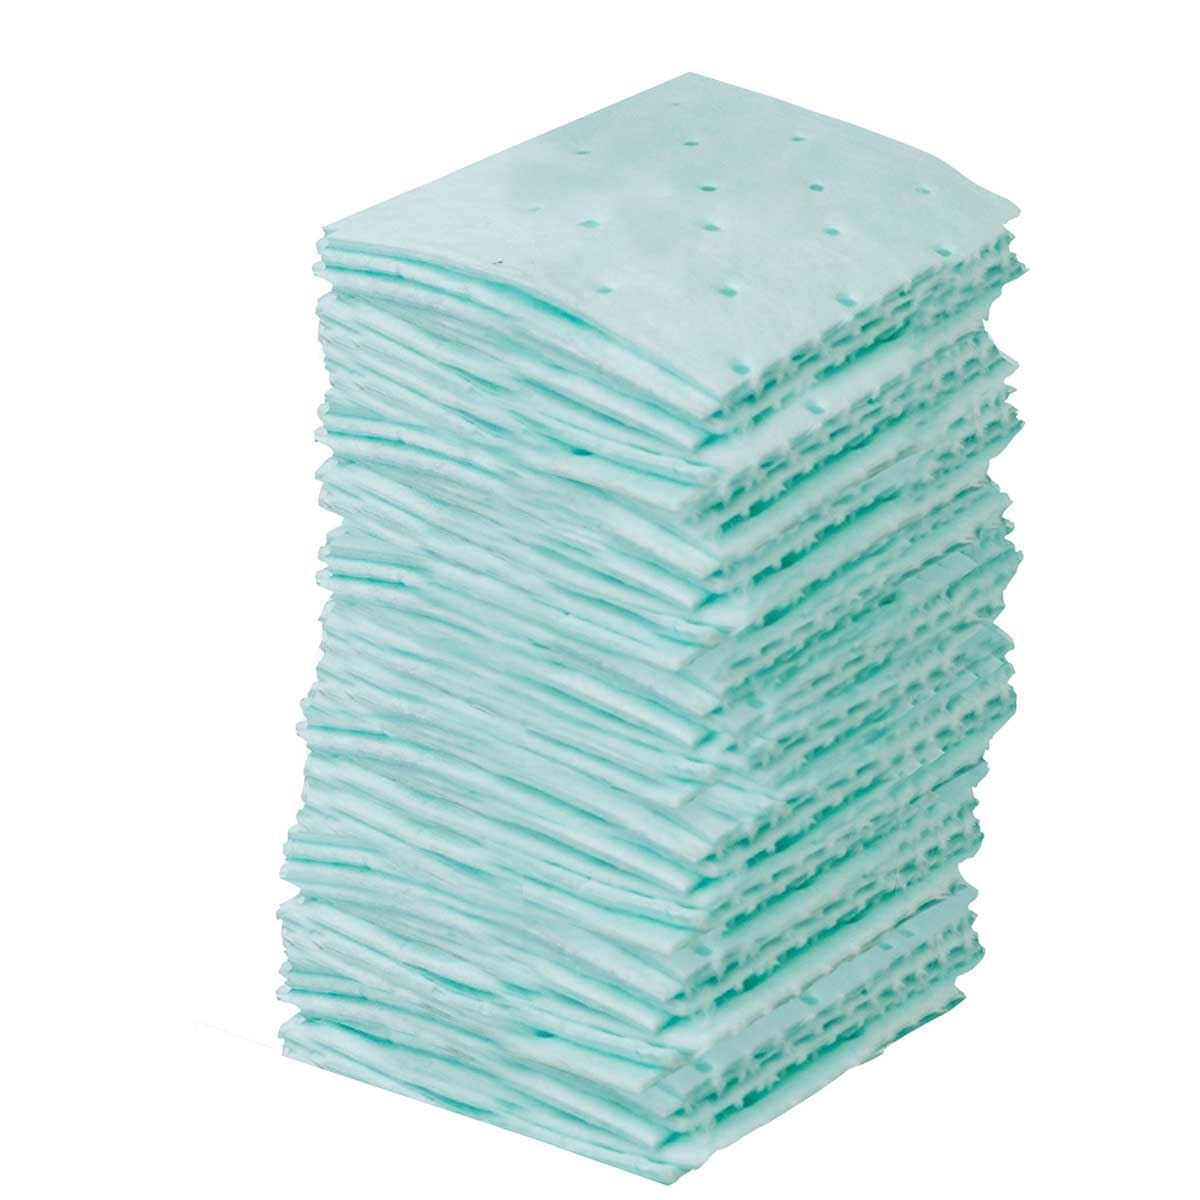 Spill Response Plus Shipping Absorbent Pads for Biohazardous Samples, Brady